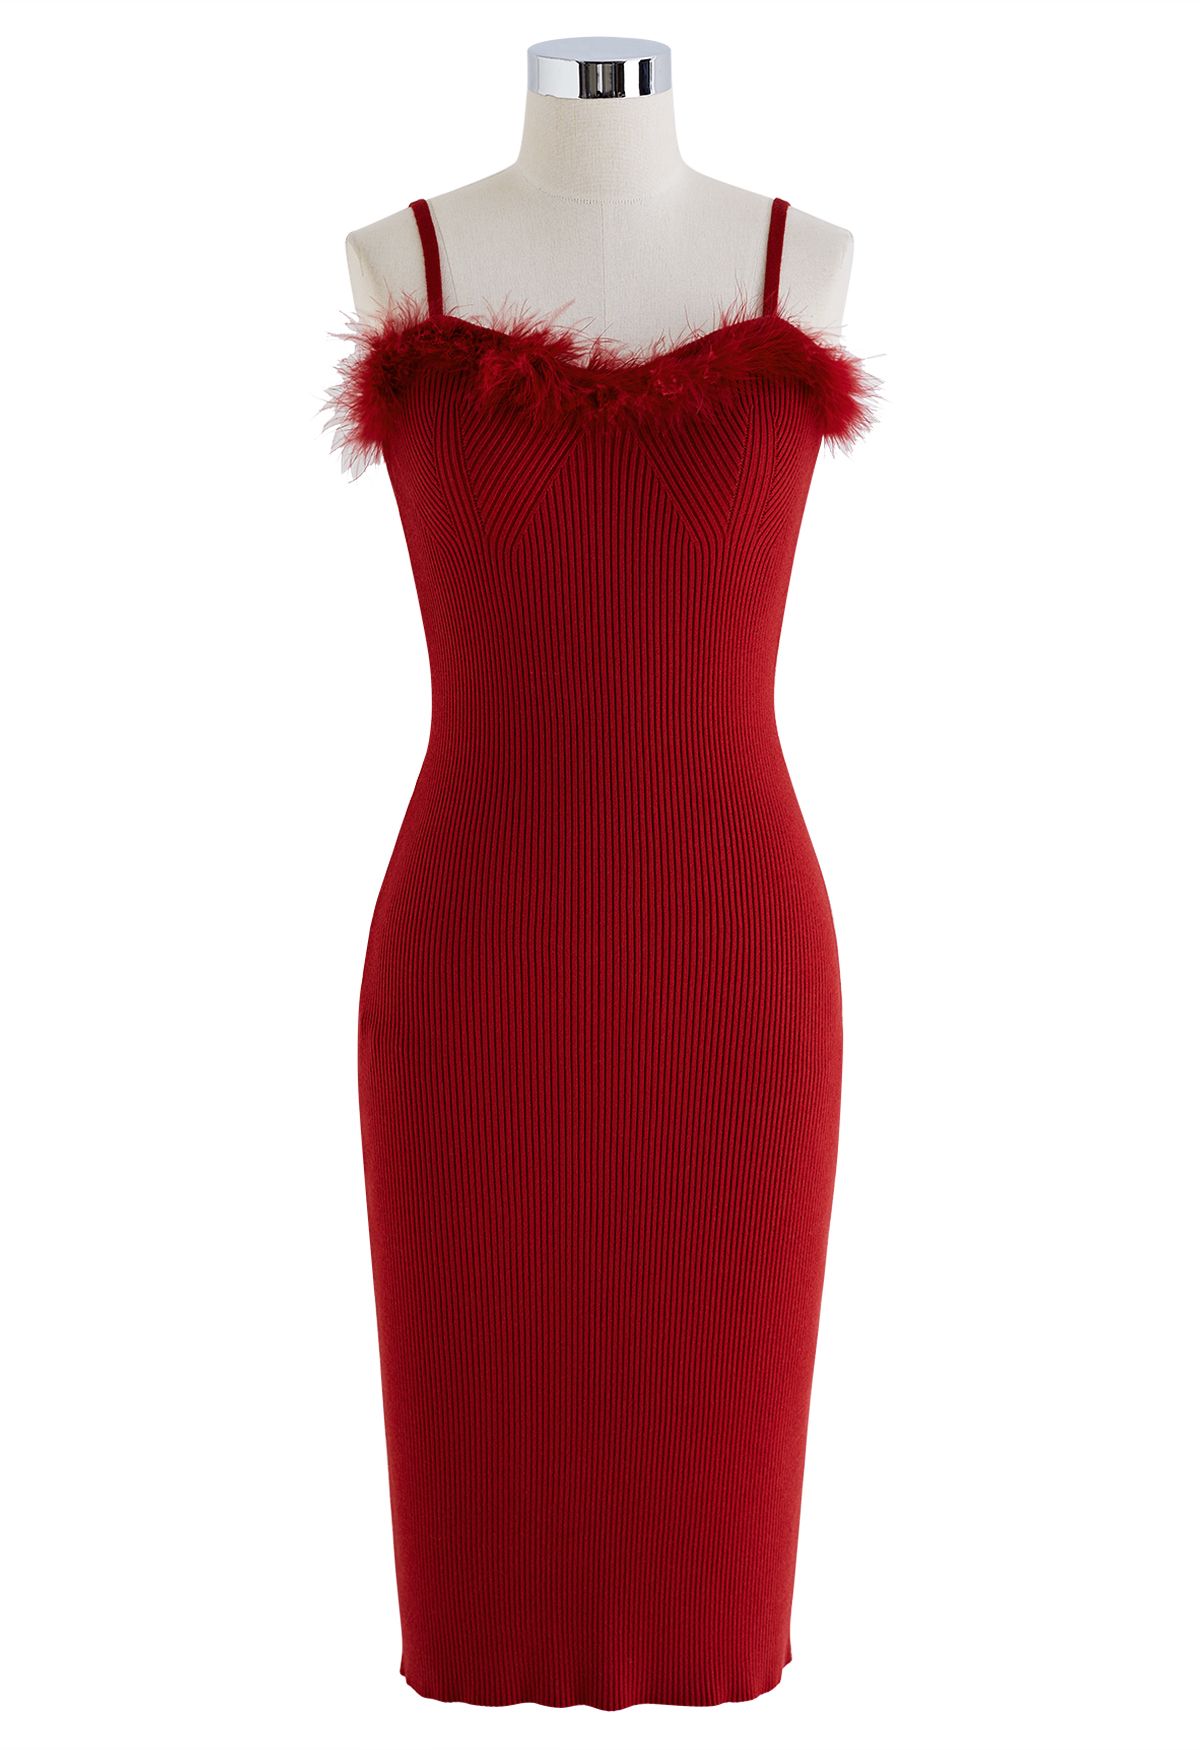 Feathered Ribbed Knit Twinset Dress in Burgundy